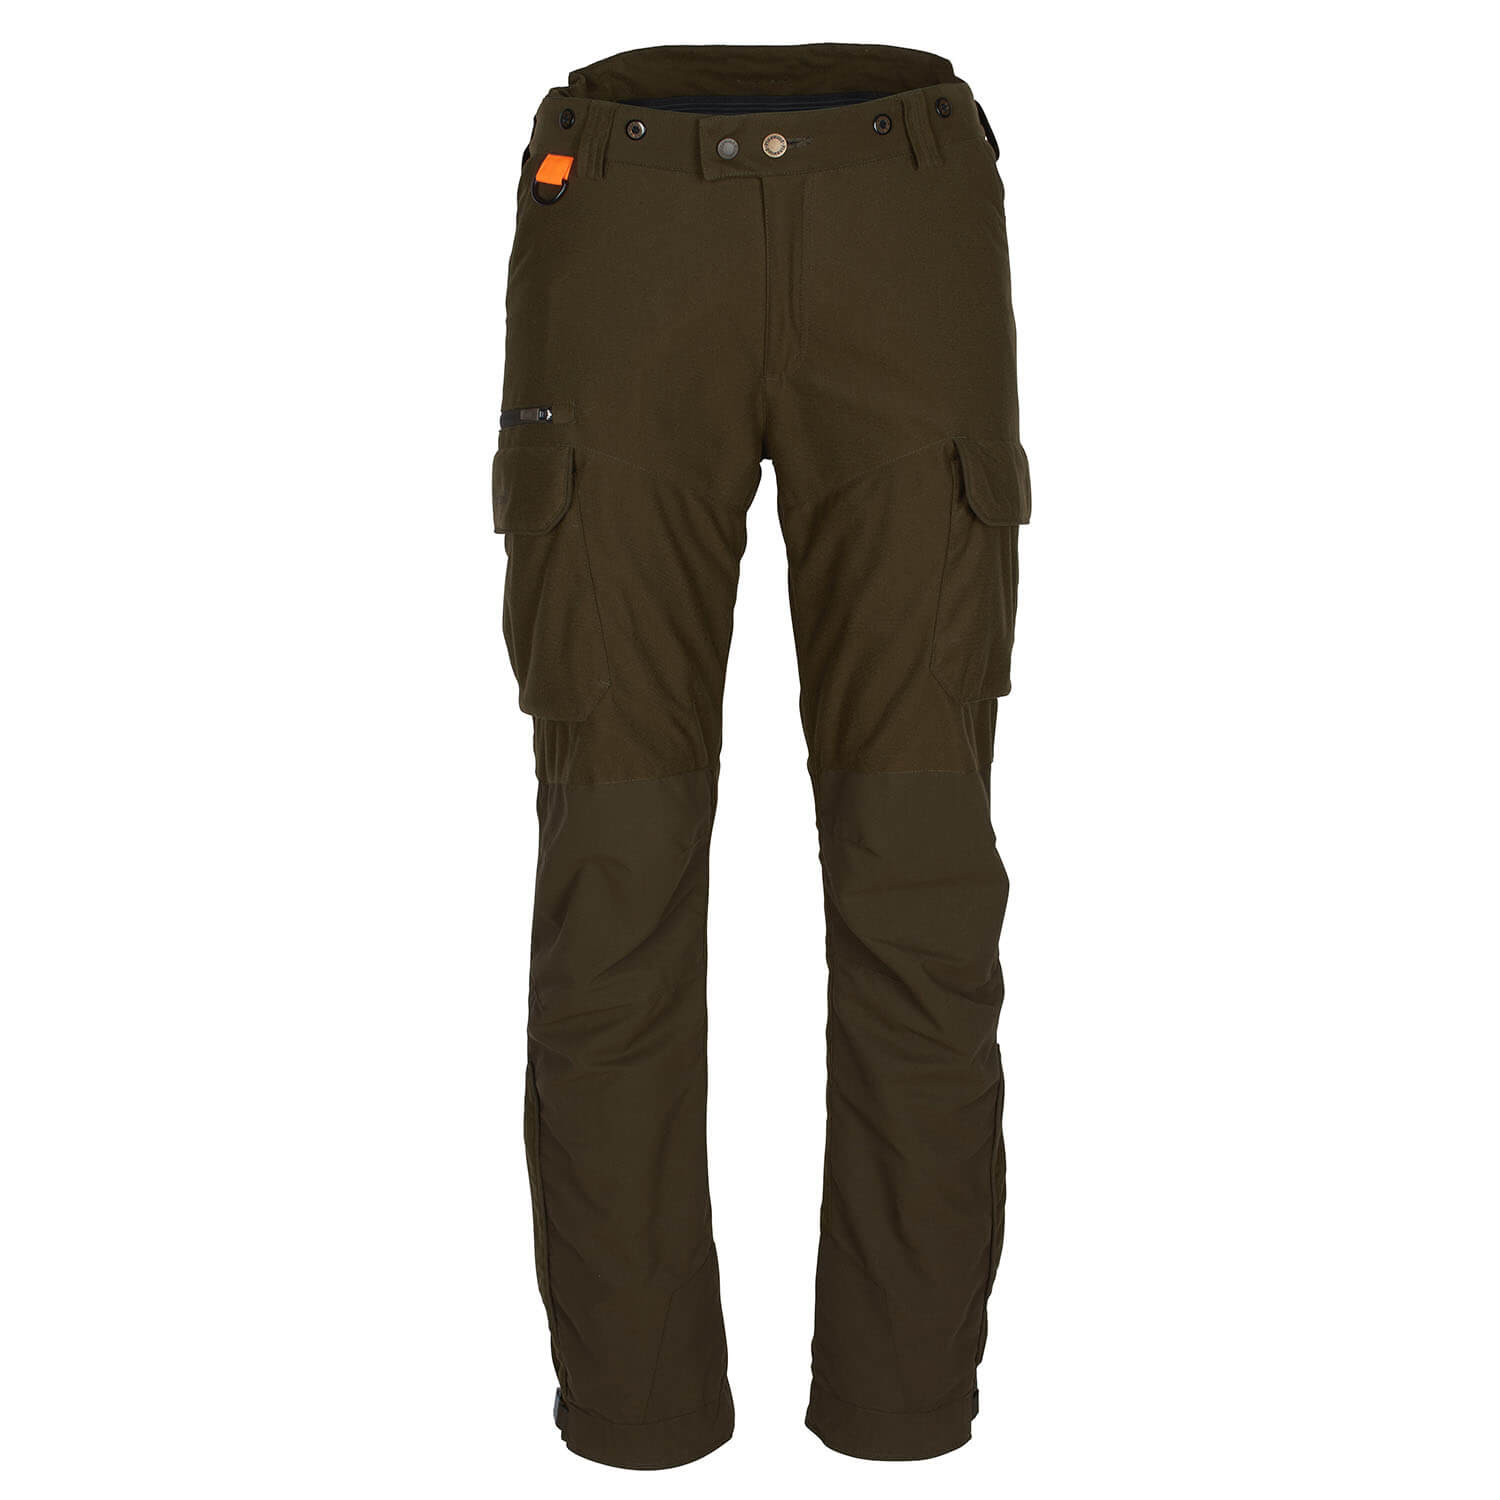  Pinewood Jachtbroek Smaland Forest Padded